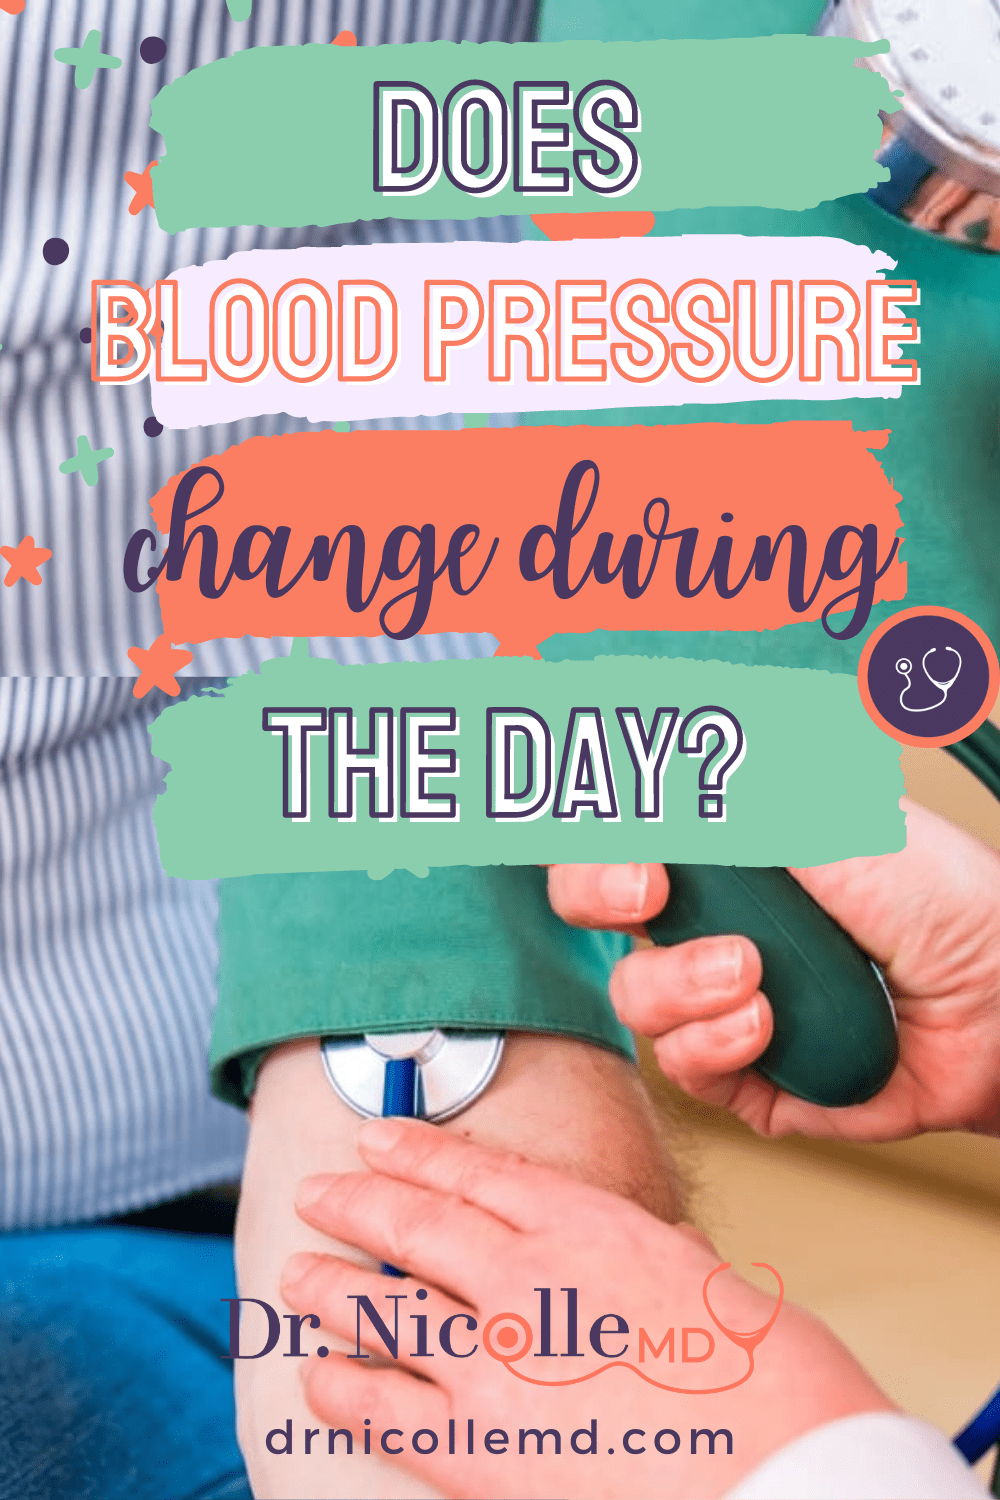 Does blood pressure change during the day?